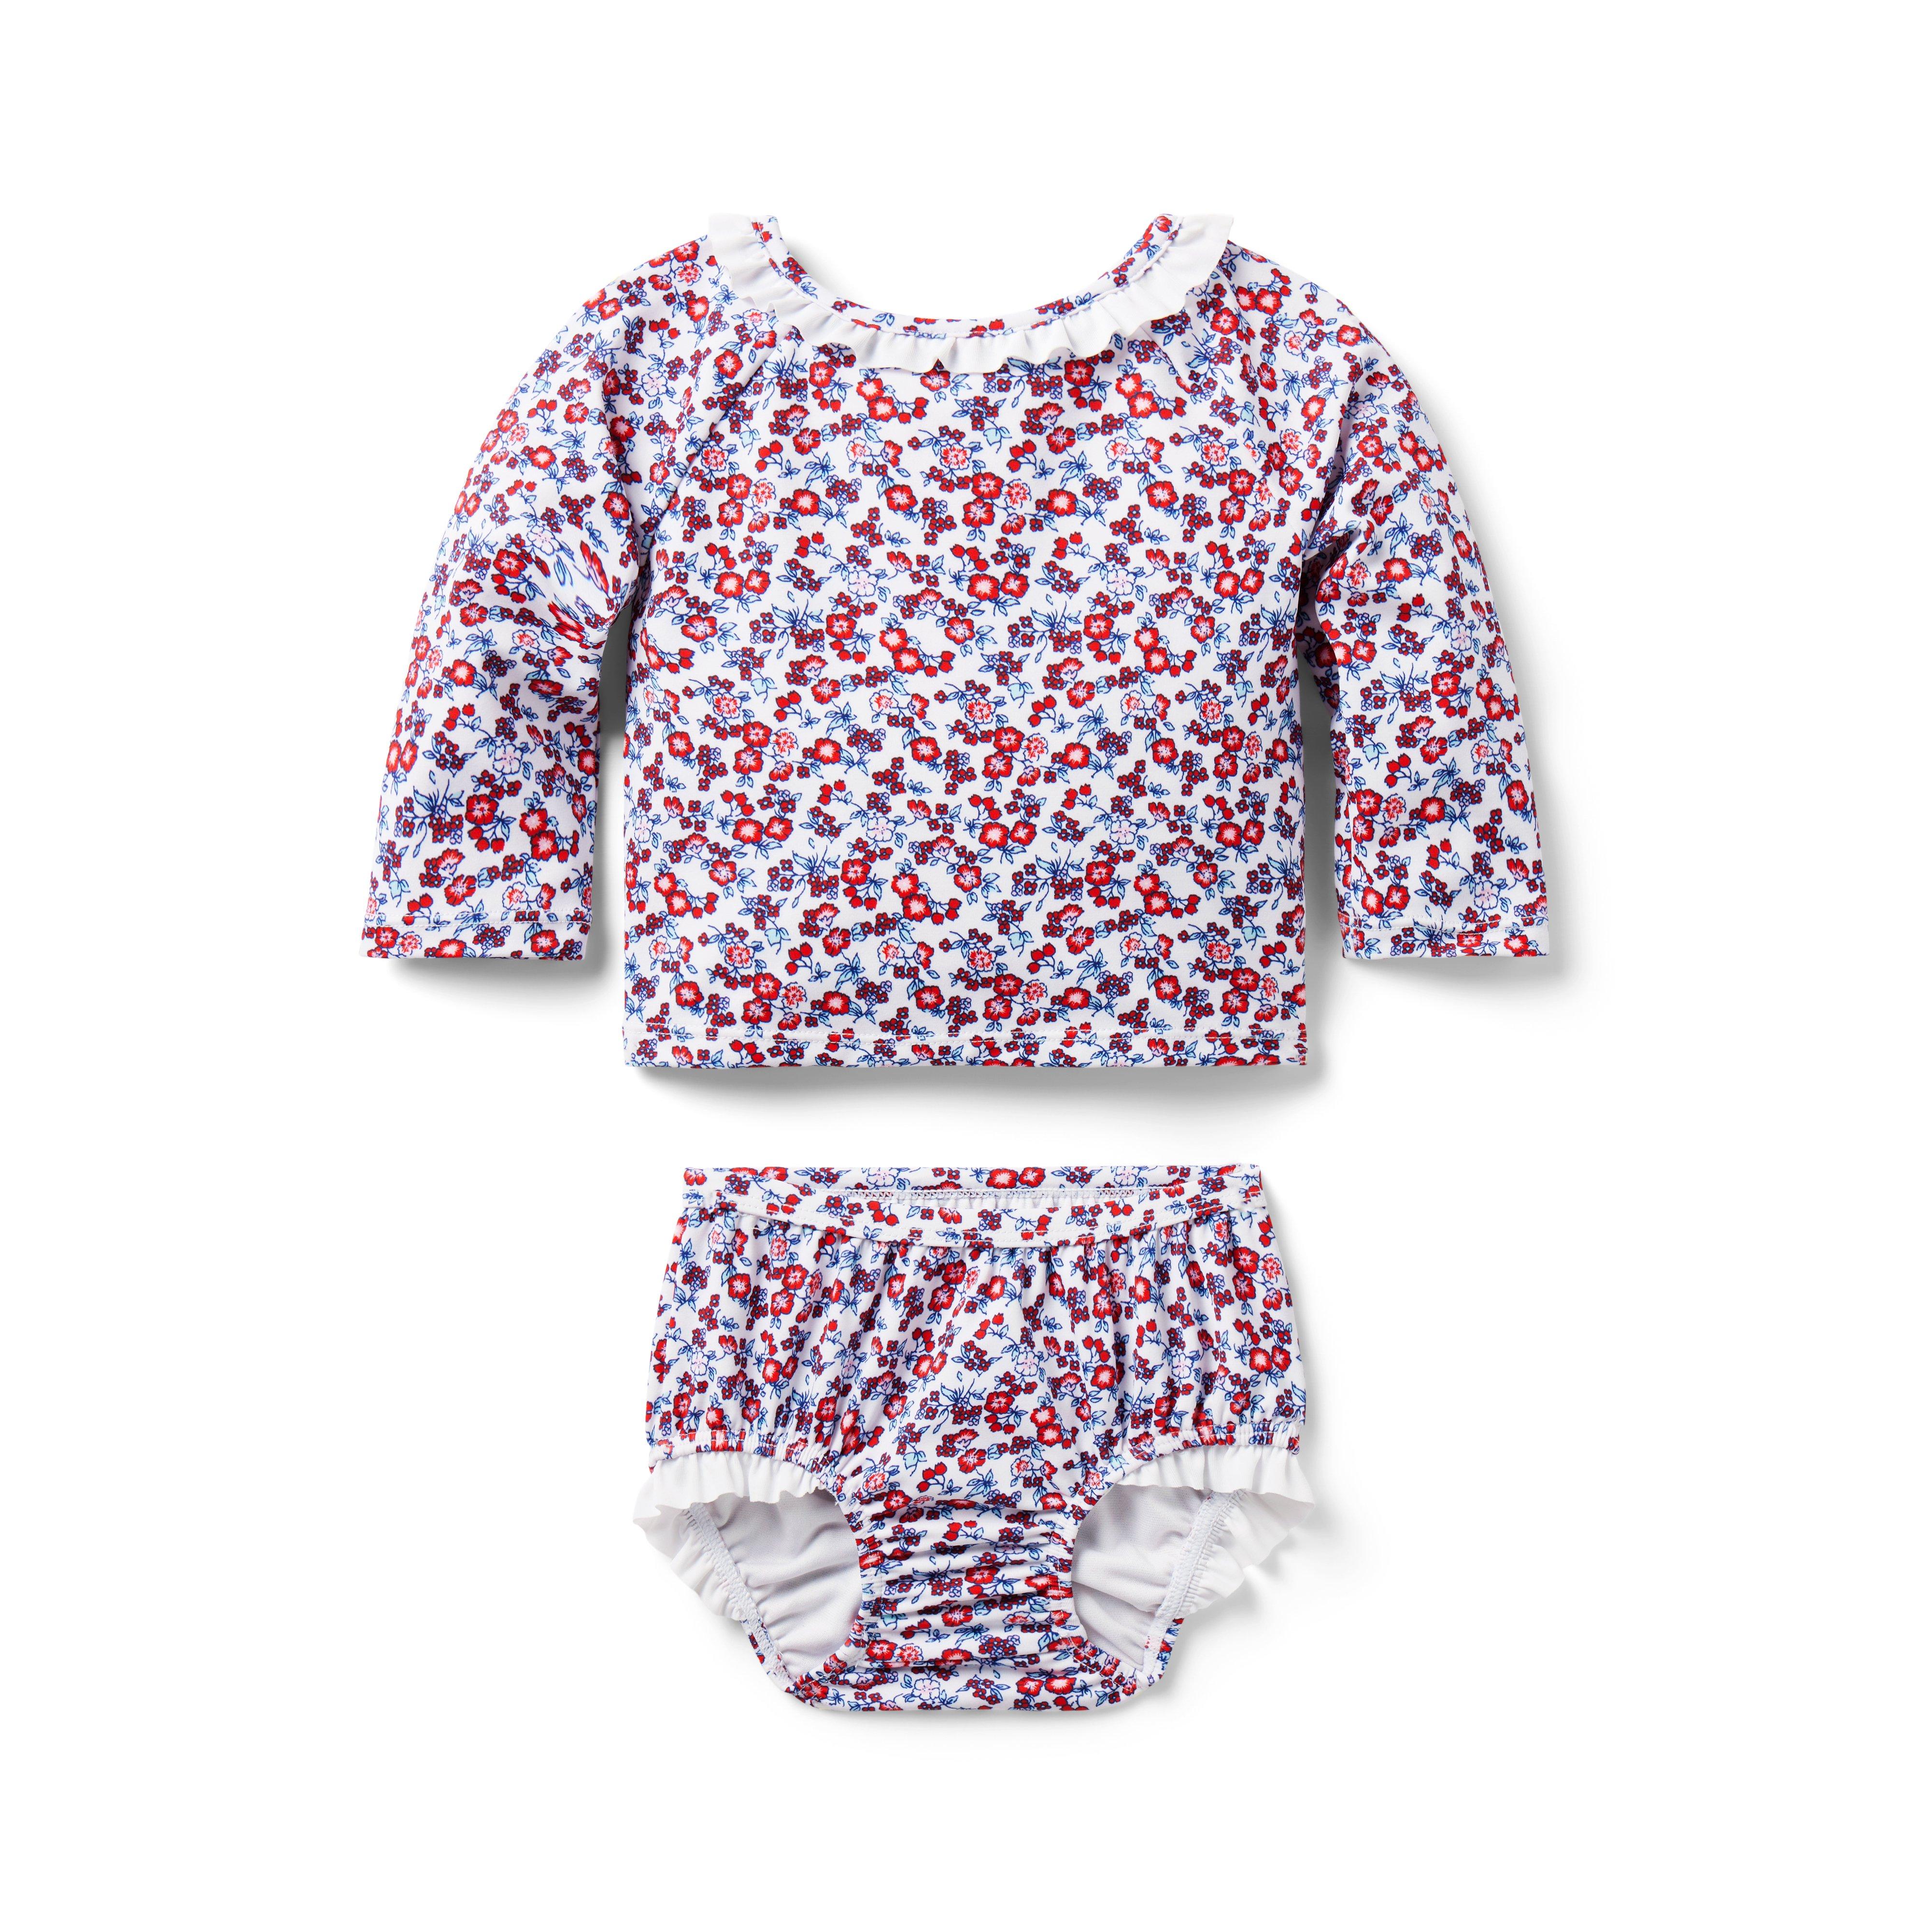 Baby Recycled Floral Rash Guard Swimsuit